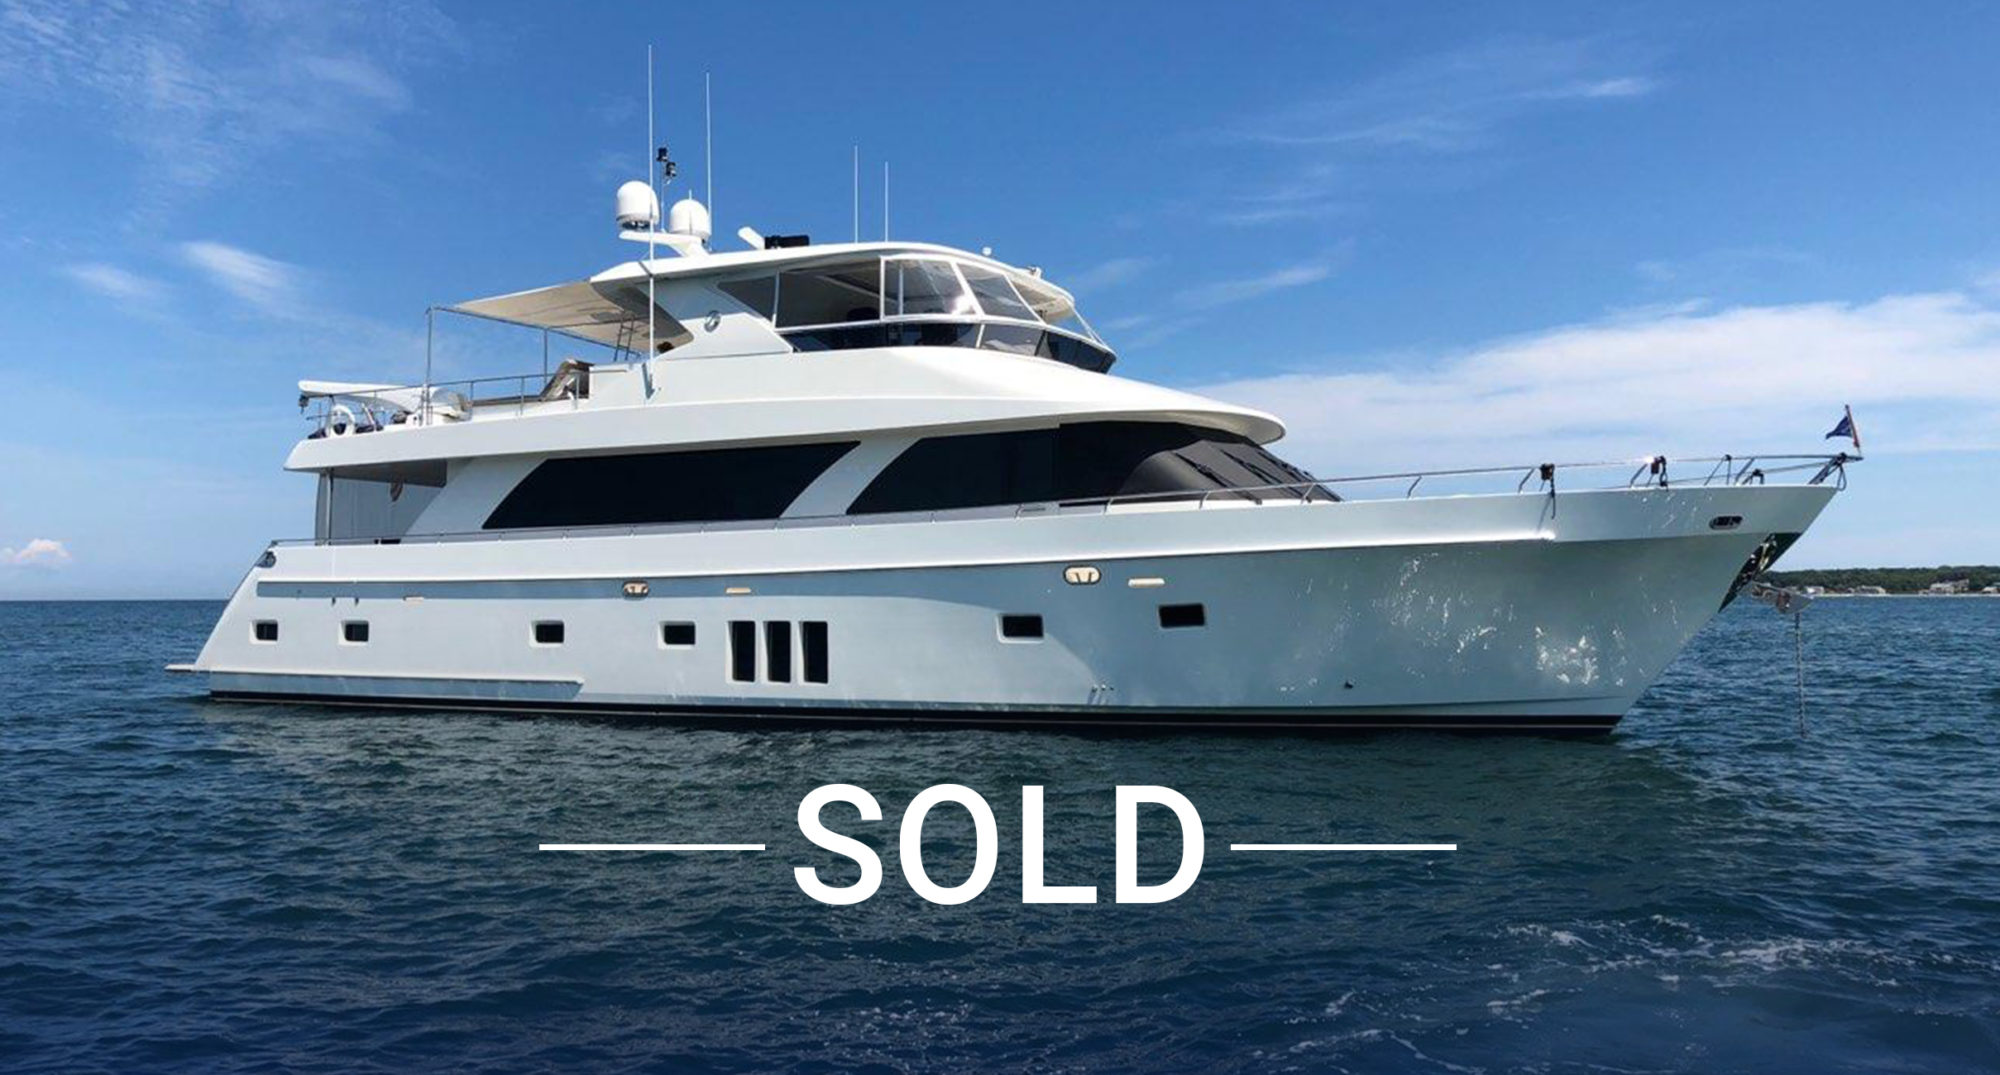 85 foot yacht price